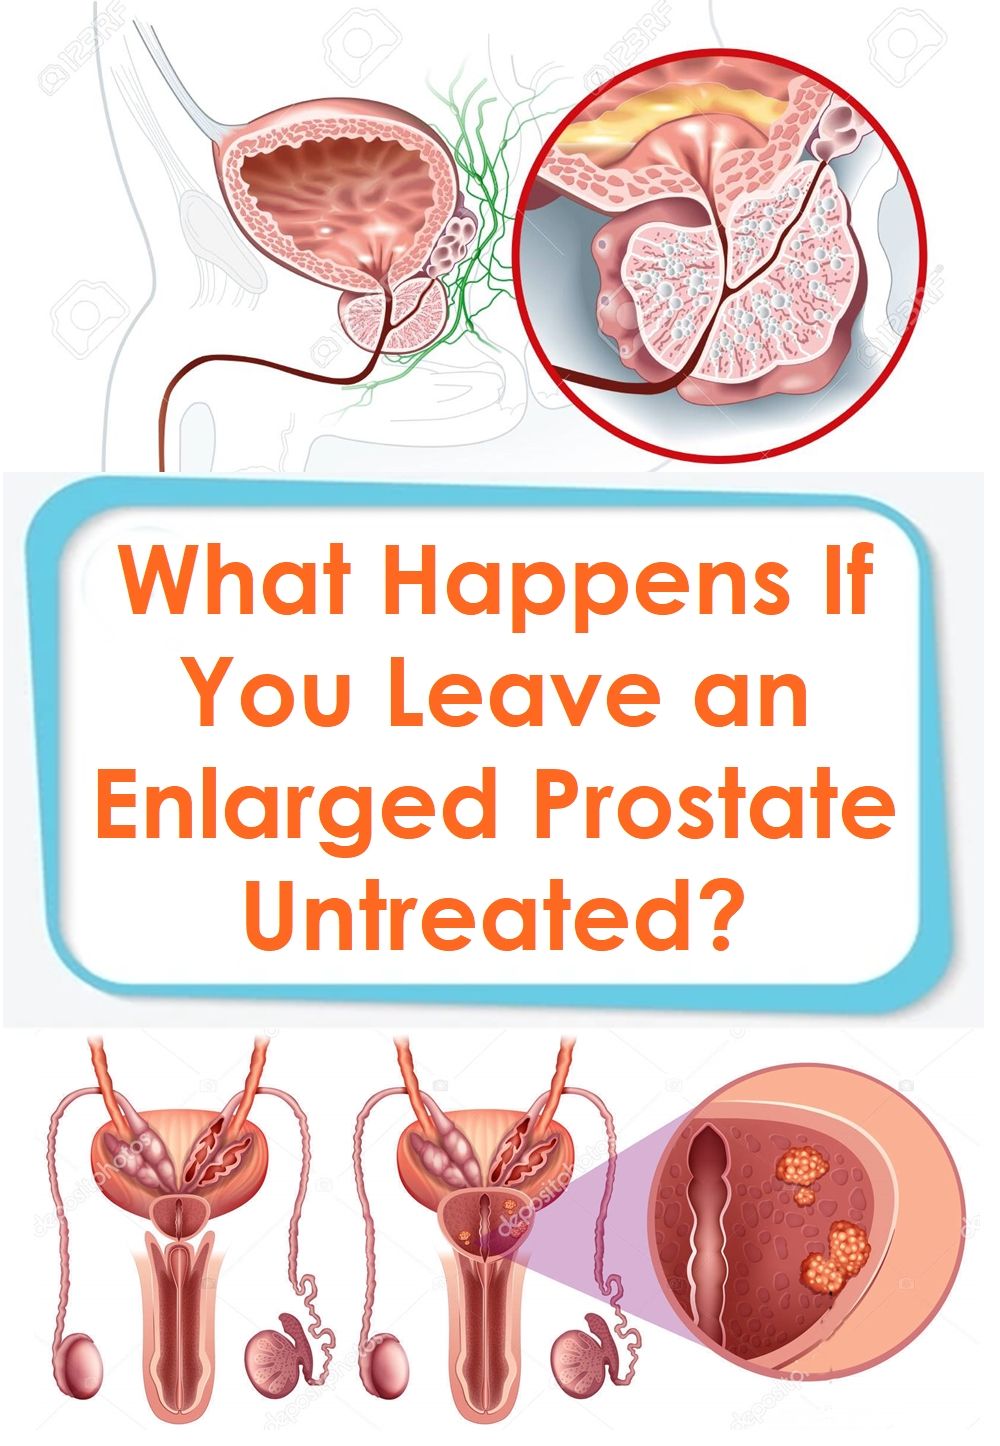 What Happens If You Leave an Enlarged Prostate Untreated ...